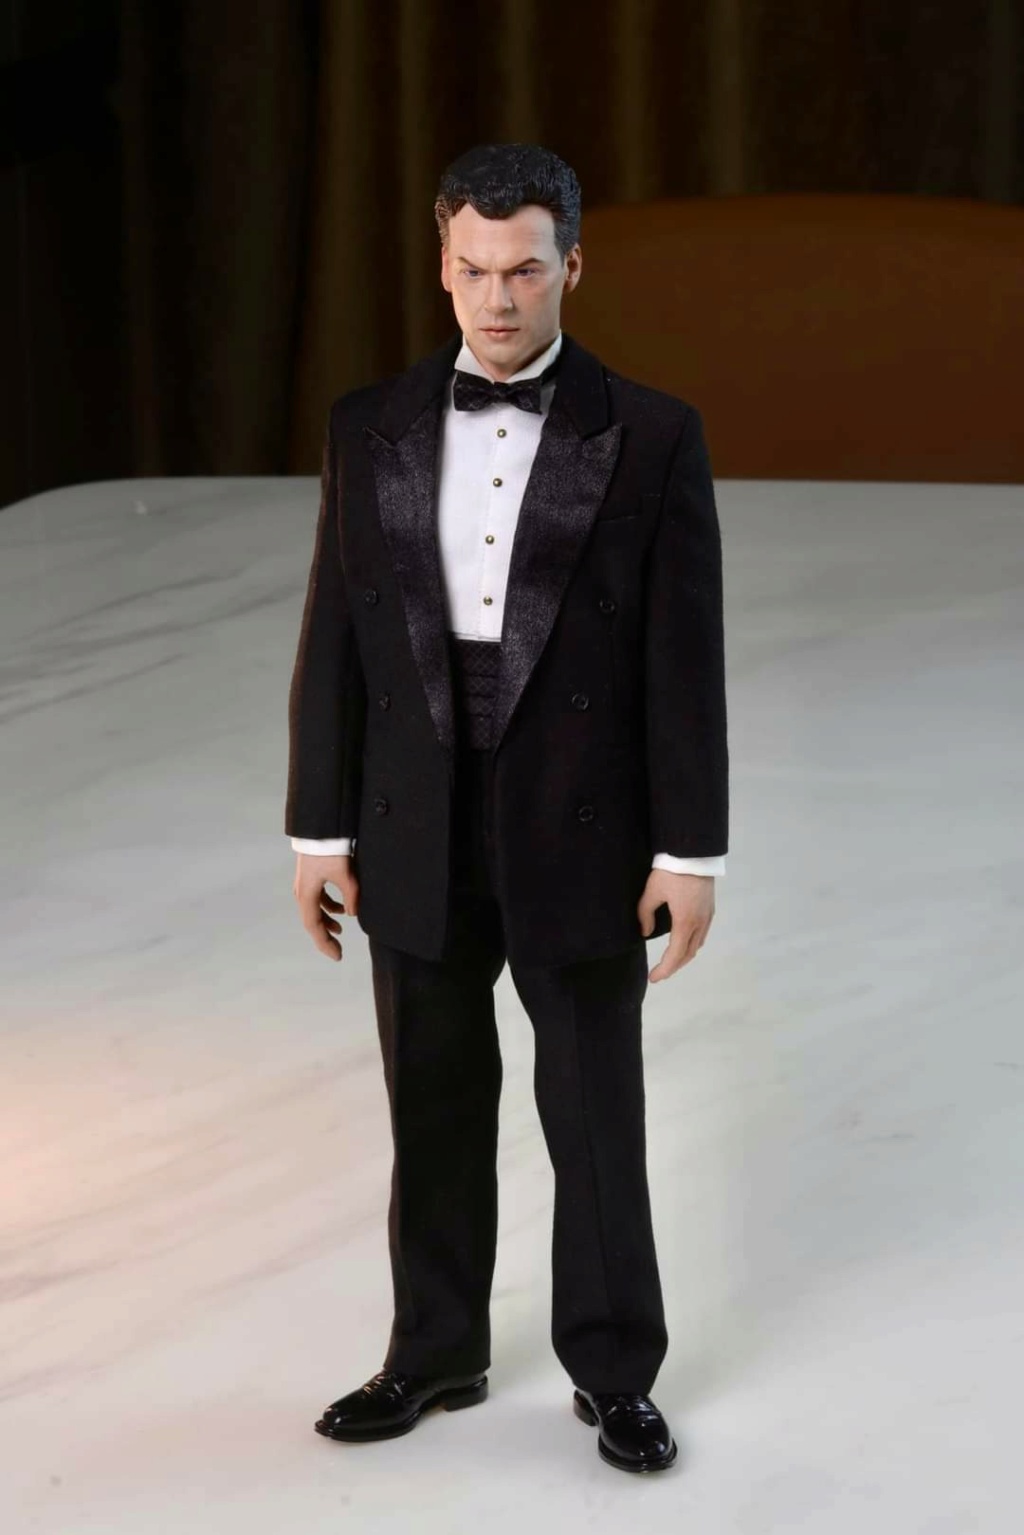 movie-based - NEW PRODUCT: Mars Toys: MAT012 1/6 Scale Mr. W figure Img_6116